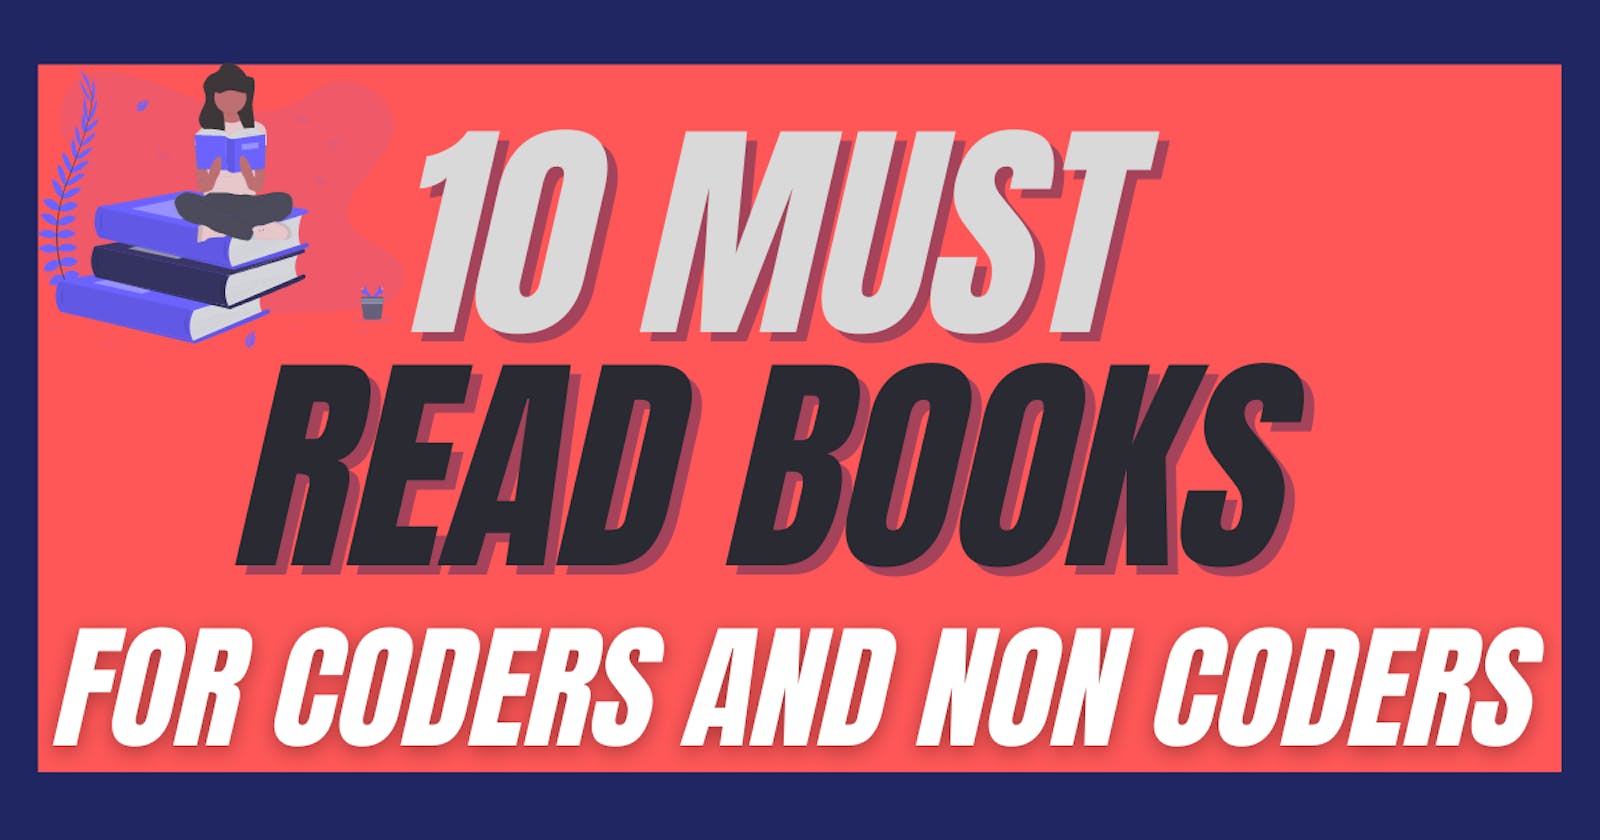 10 Must read Books for Coder and Non Coders (personal reviews)